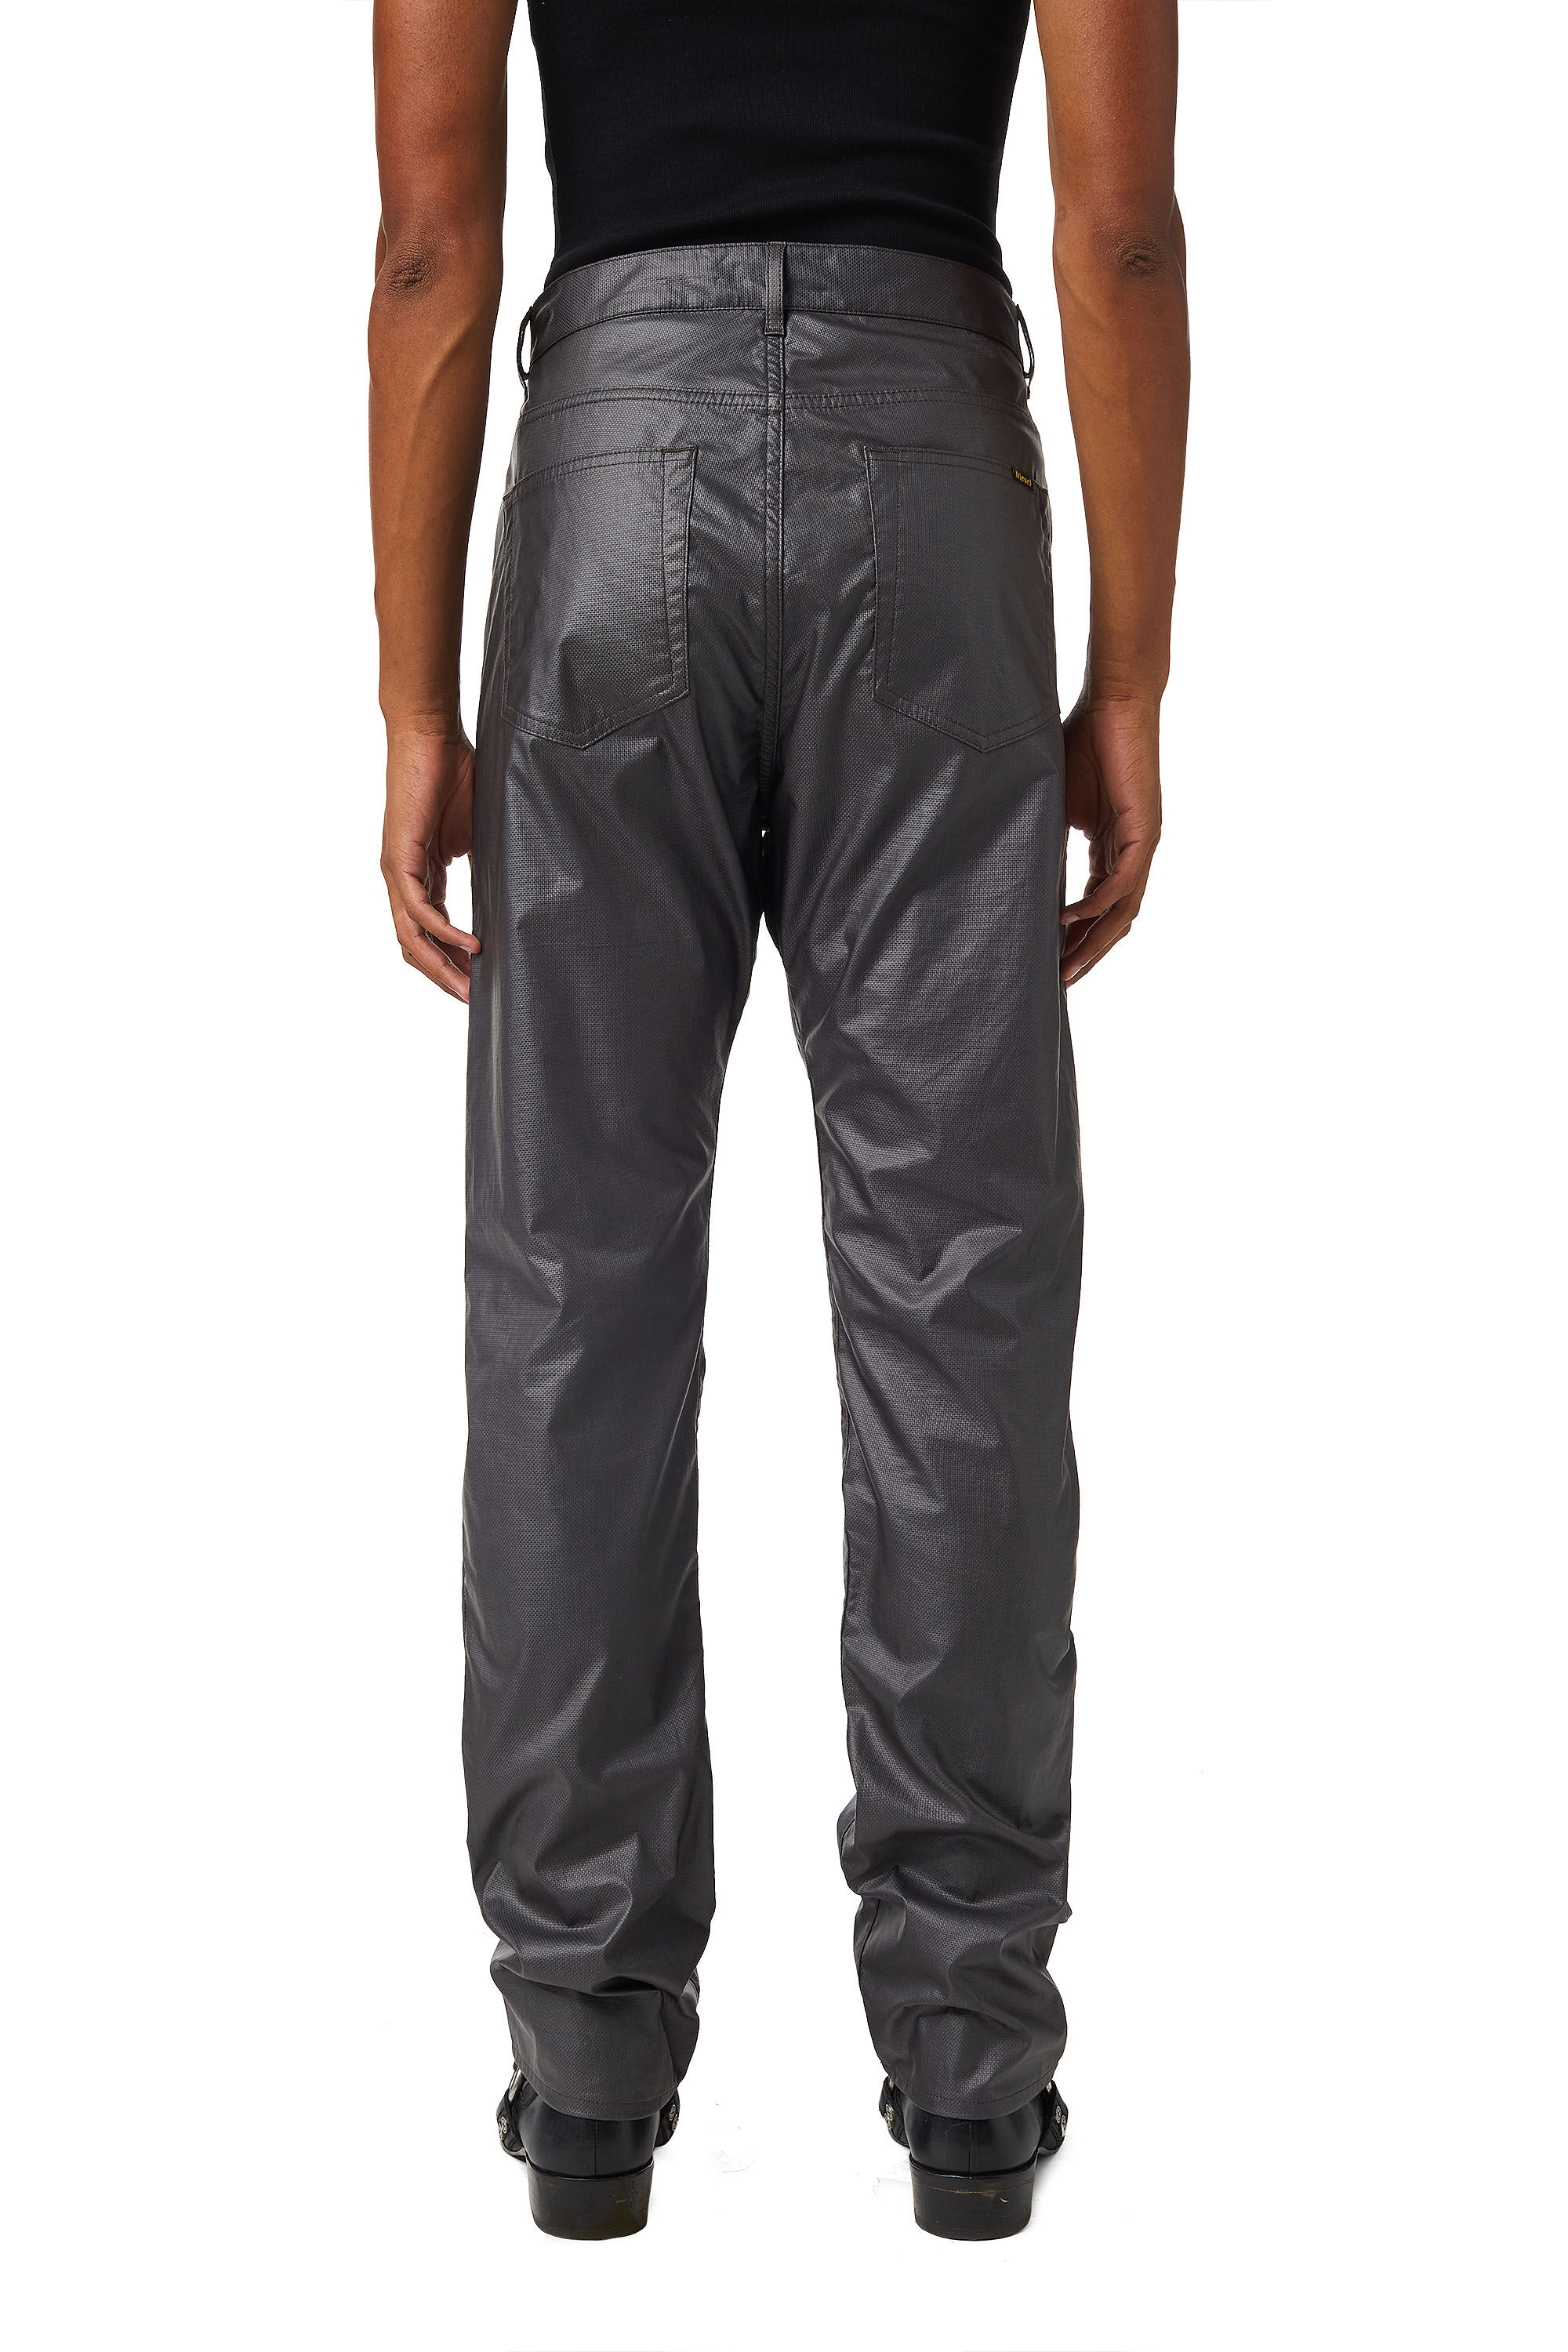 Diesel - DXD-22-P07, Gris oscuro - Image 5